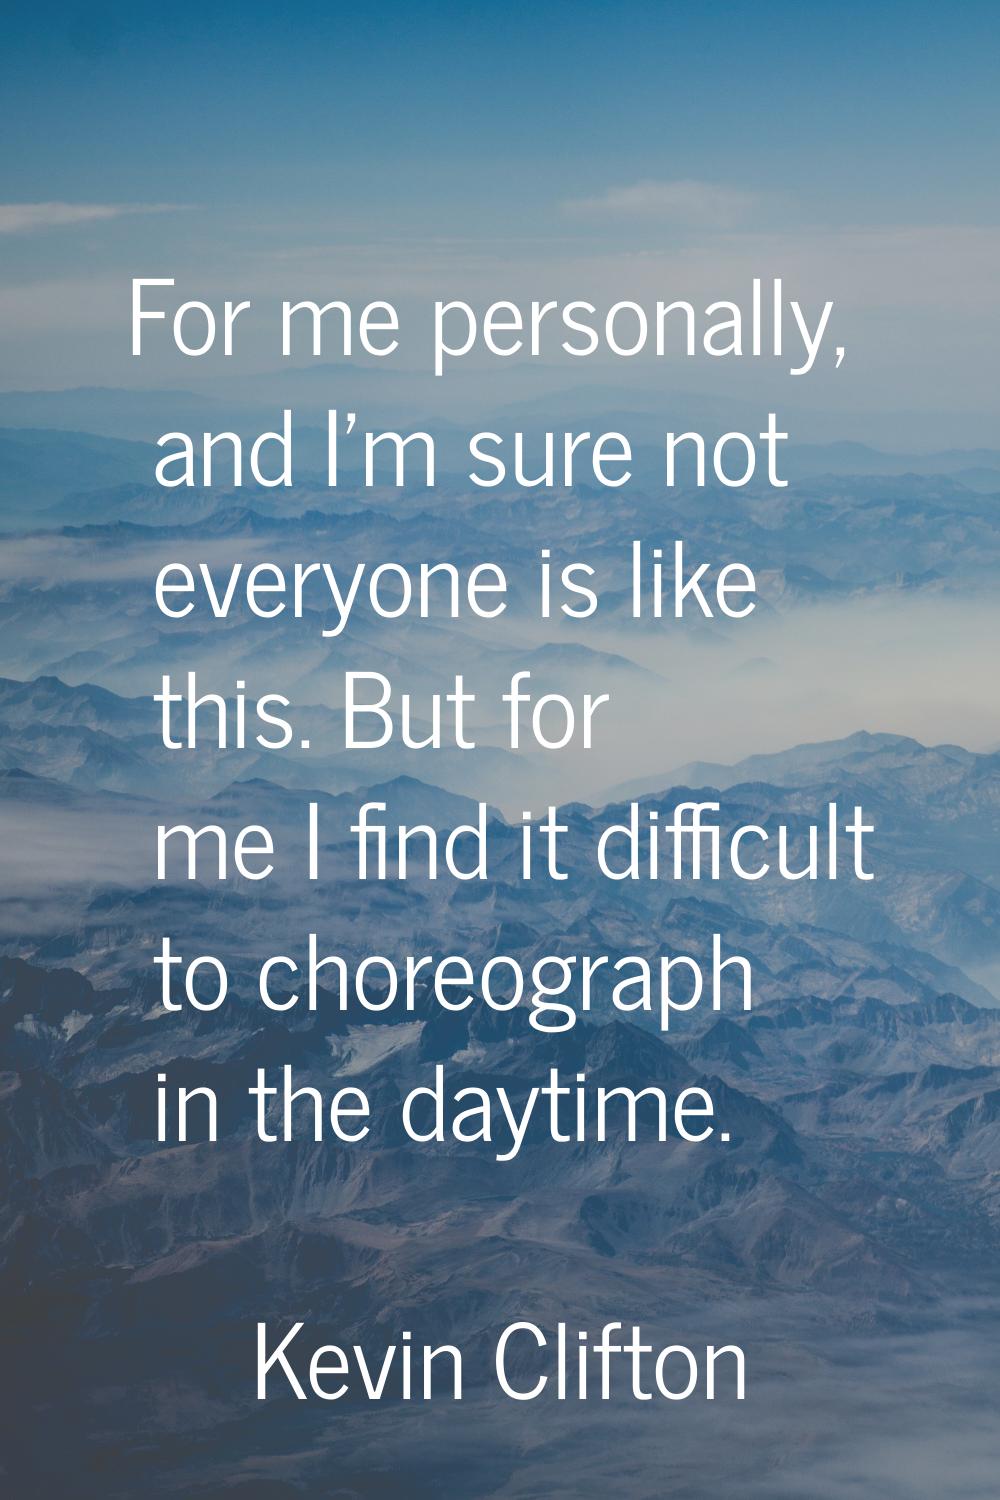 For me personally, and I’m sure not everyone is like this. But for me I find it difficult to choreo